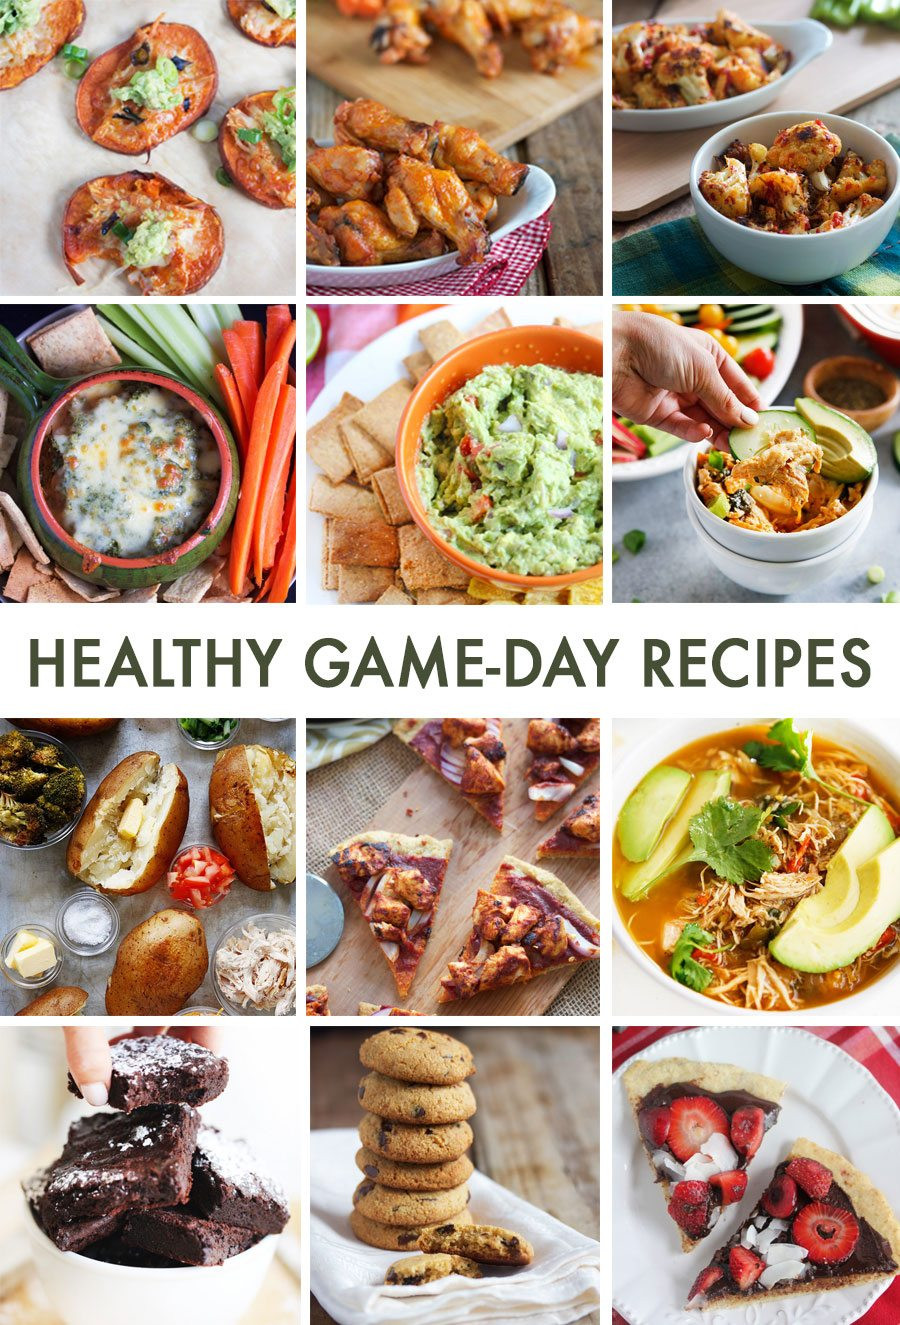 Football Dinners Recipes
 Healthy Game Day Recipes Perfect For Football Entertaining